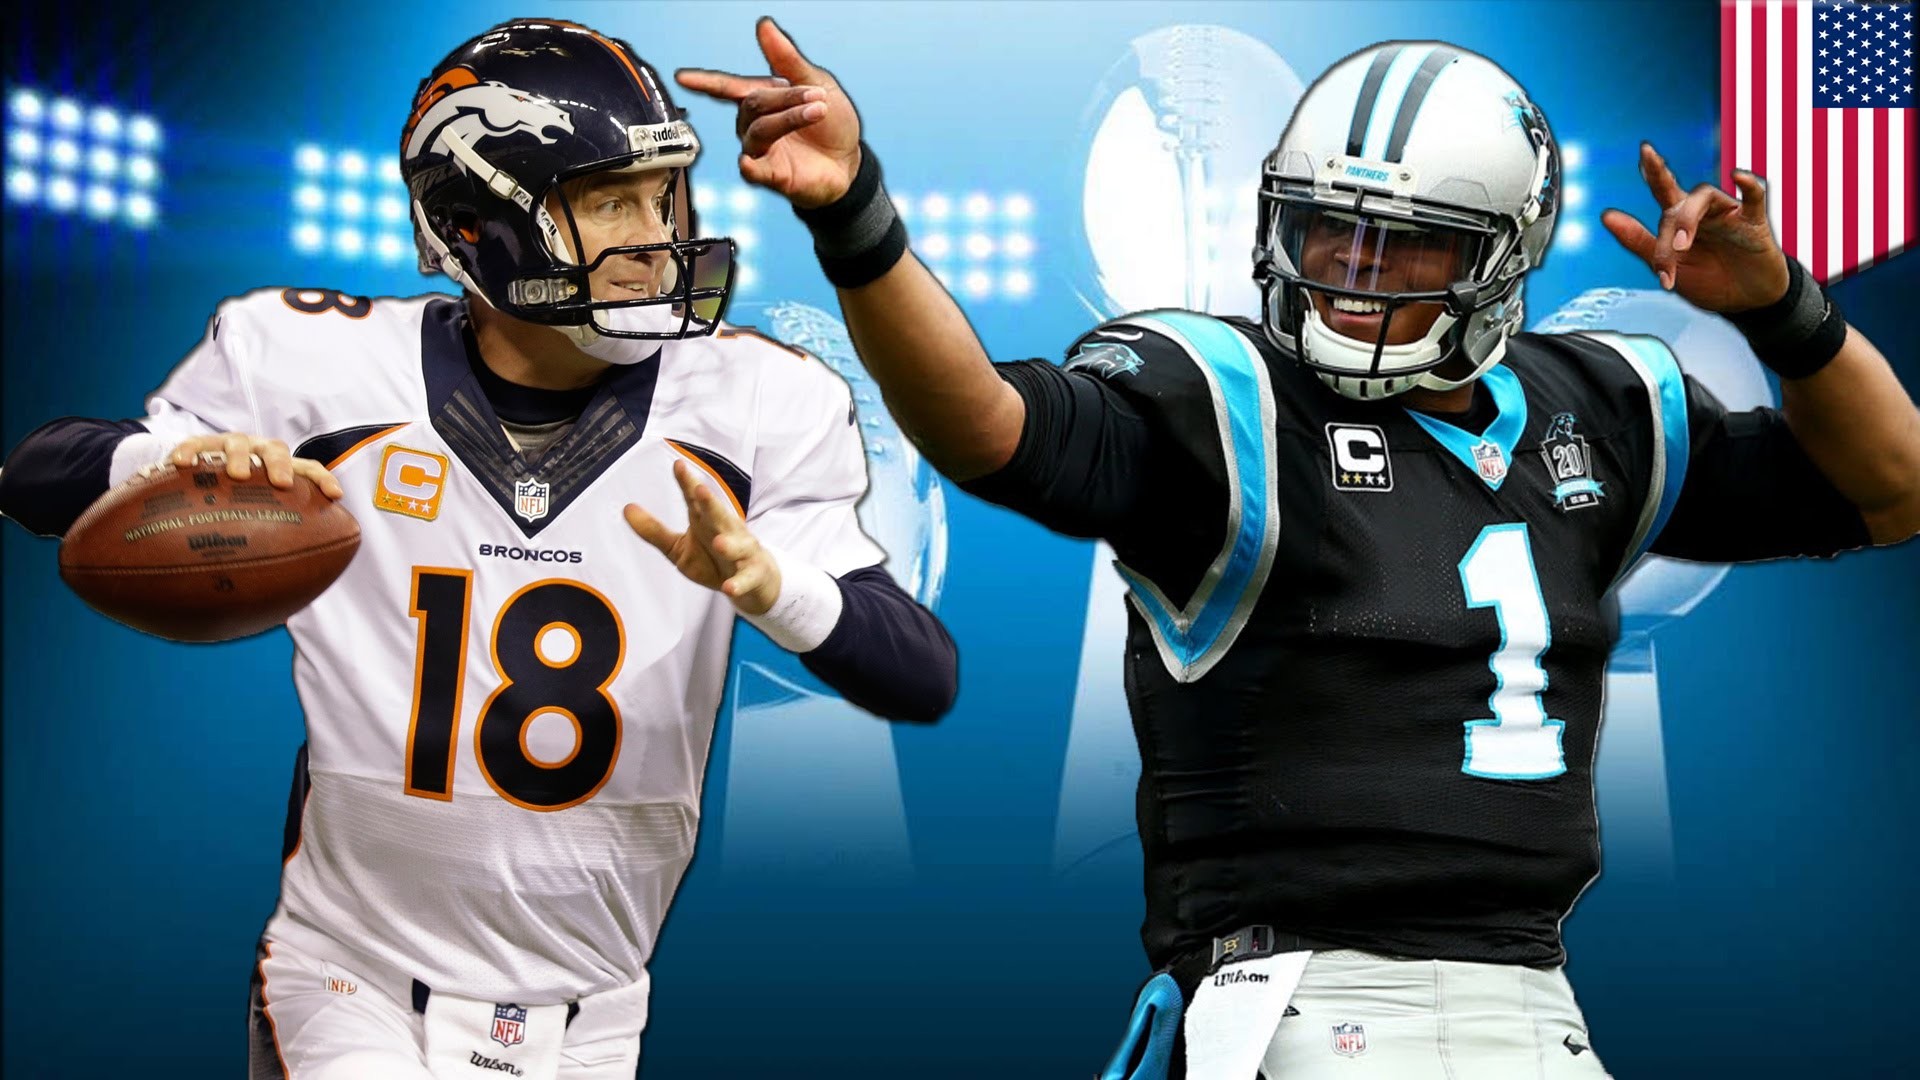 1920x1080 Super Bowl 50 Panthers vs Broncos: Cam Newton and The Sheriff ready to go  bananas